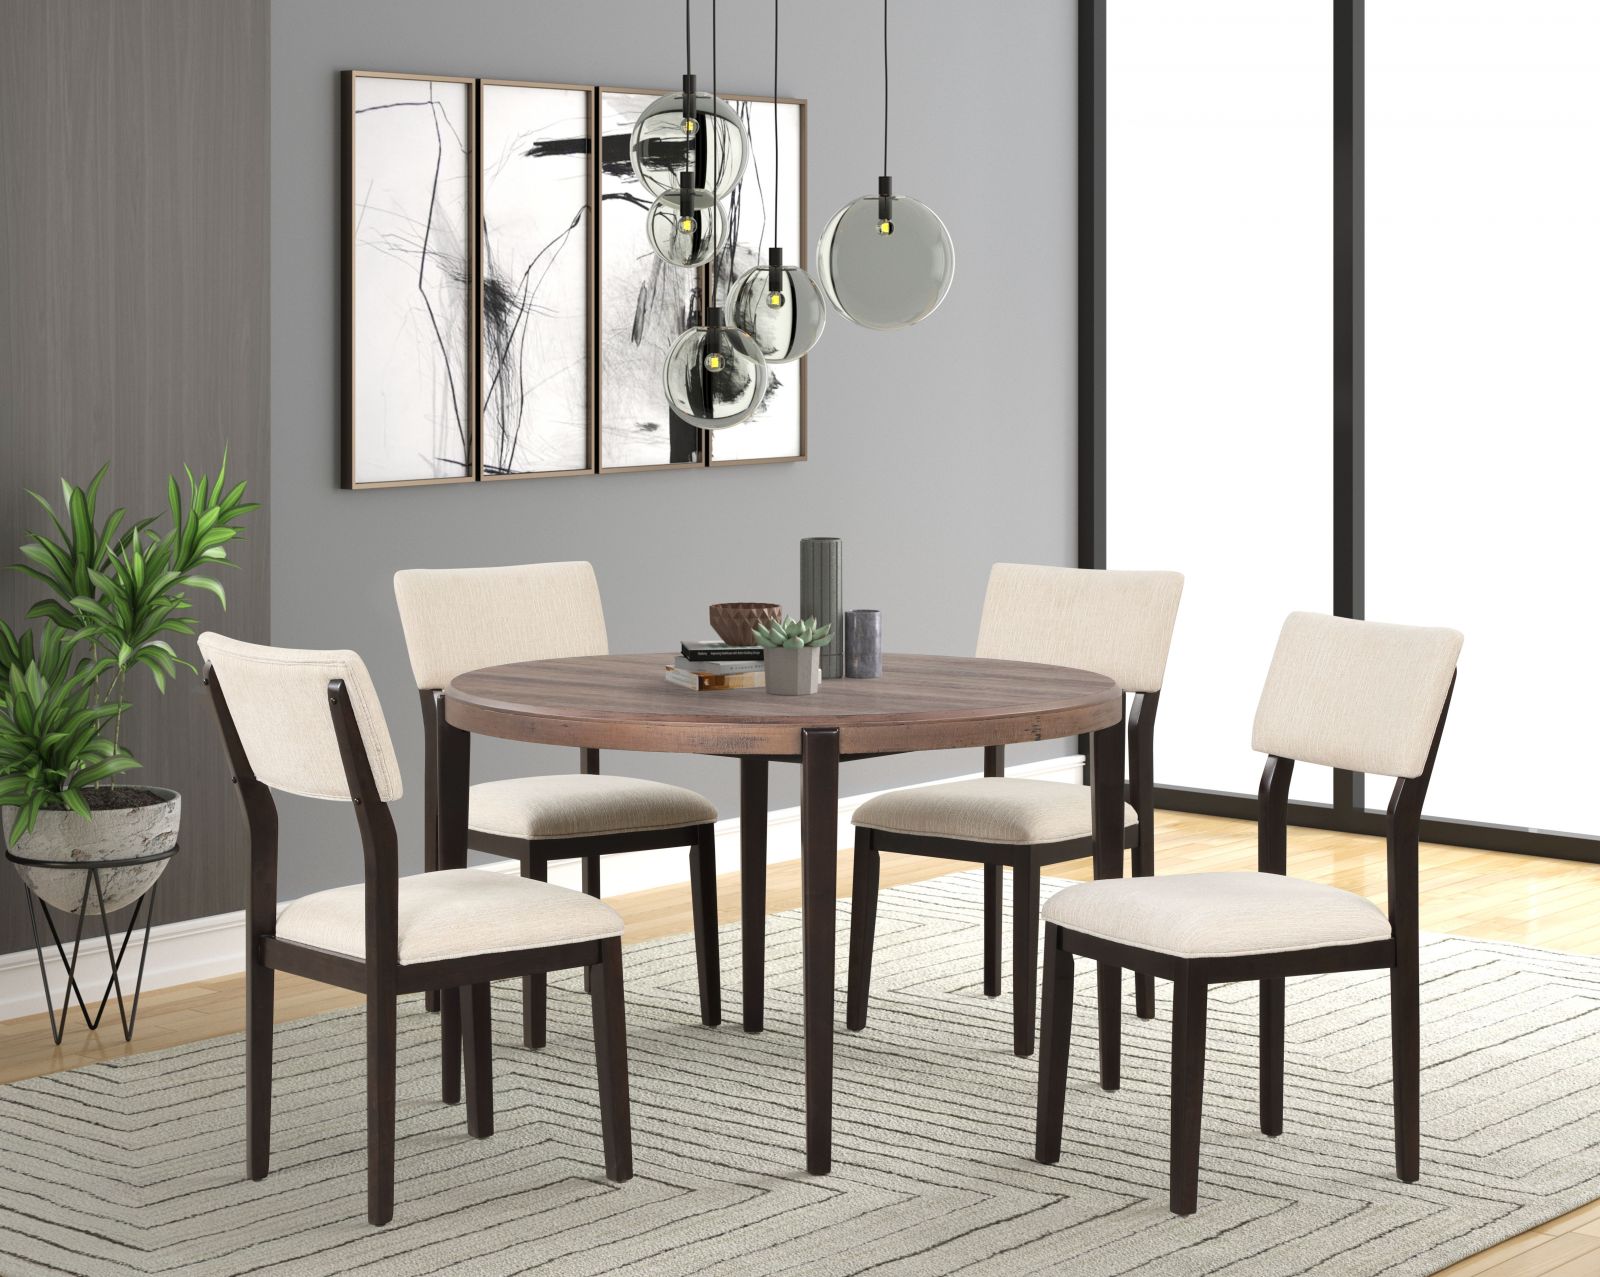 Kolby Round Dining Table with 4 Chairs